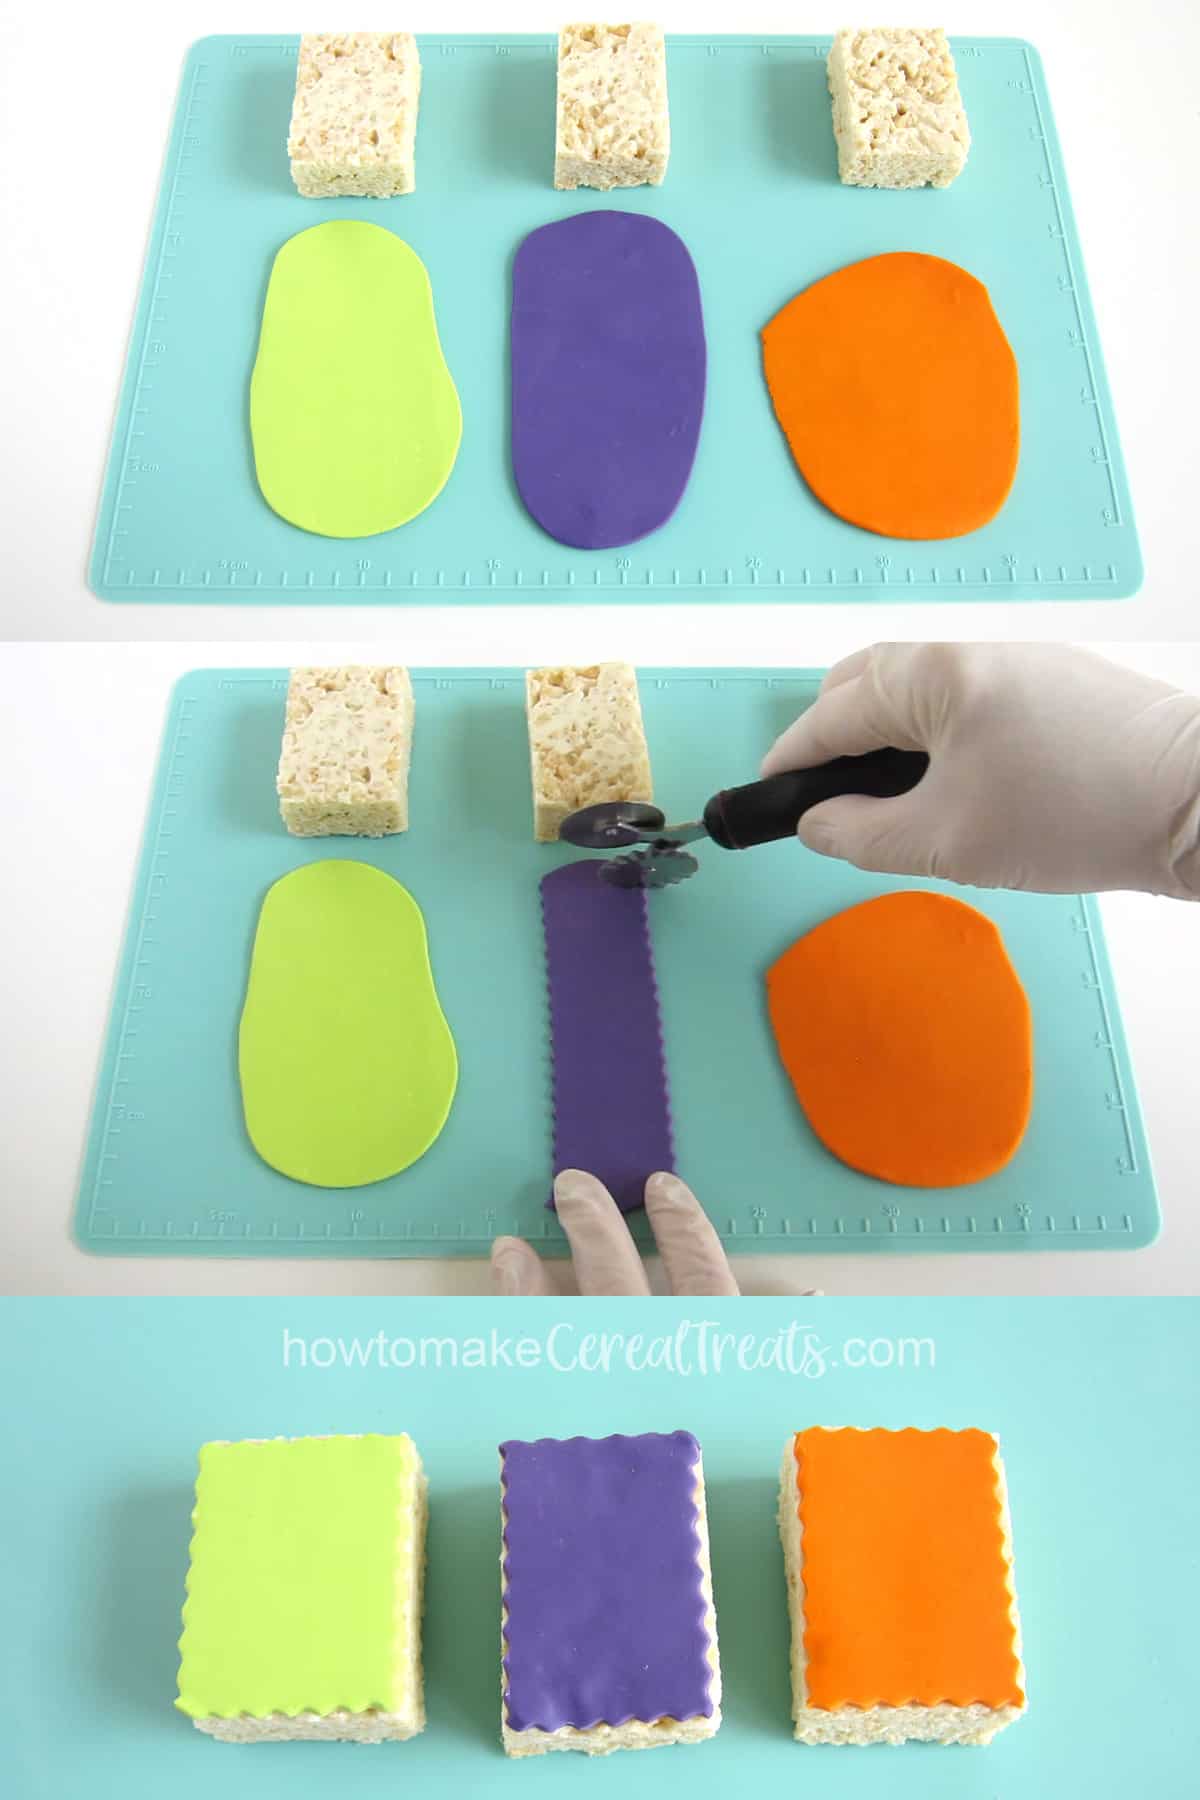 Roll out neon green, purple, and orange modeling chocolate then cut using a pastry wheel, and attach the rectangles to the rice krispie treats. 